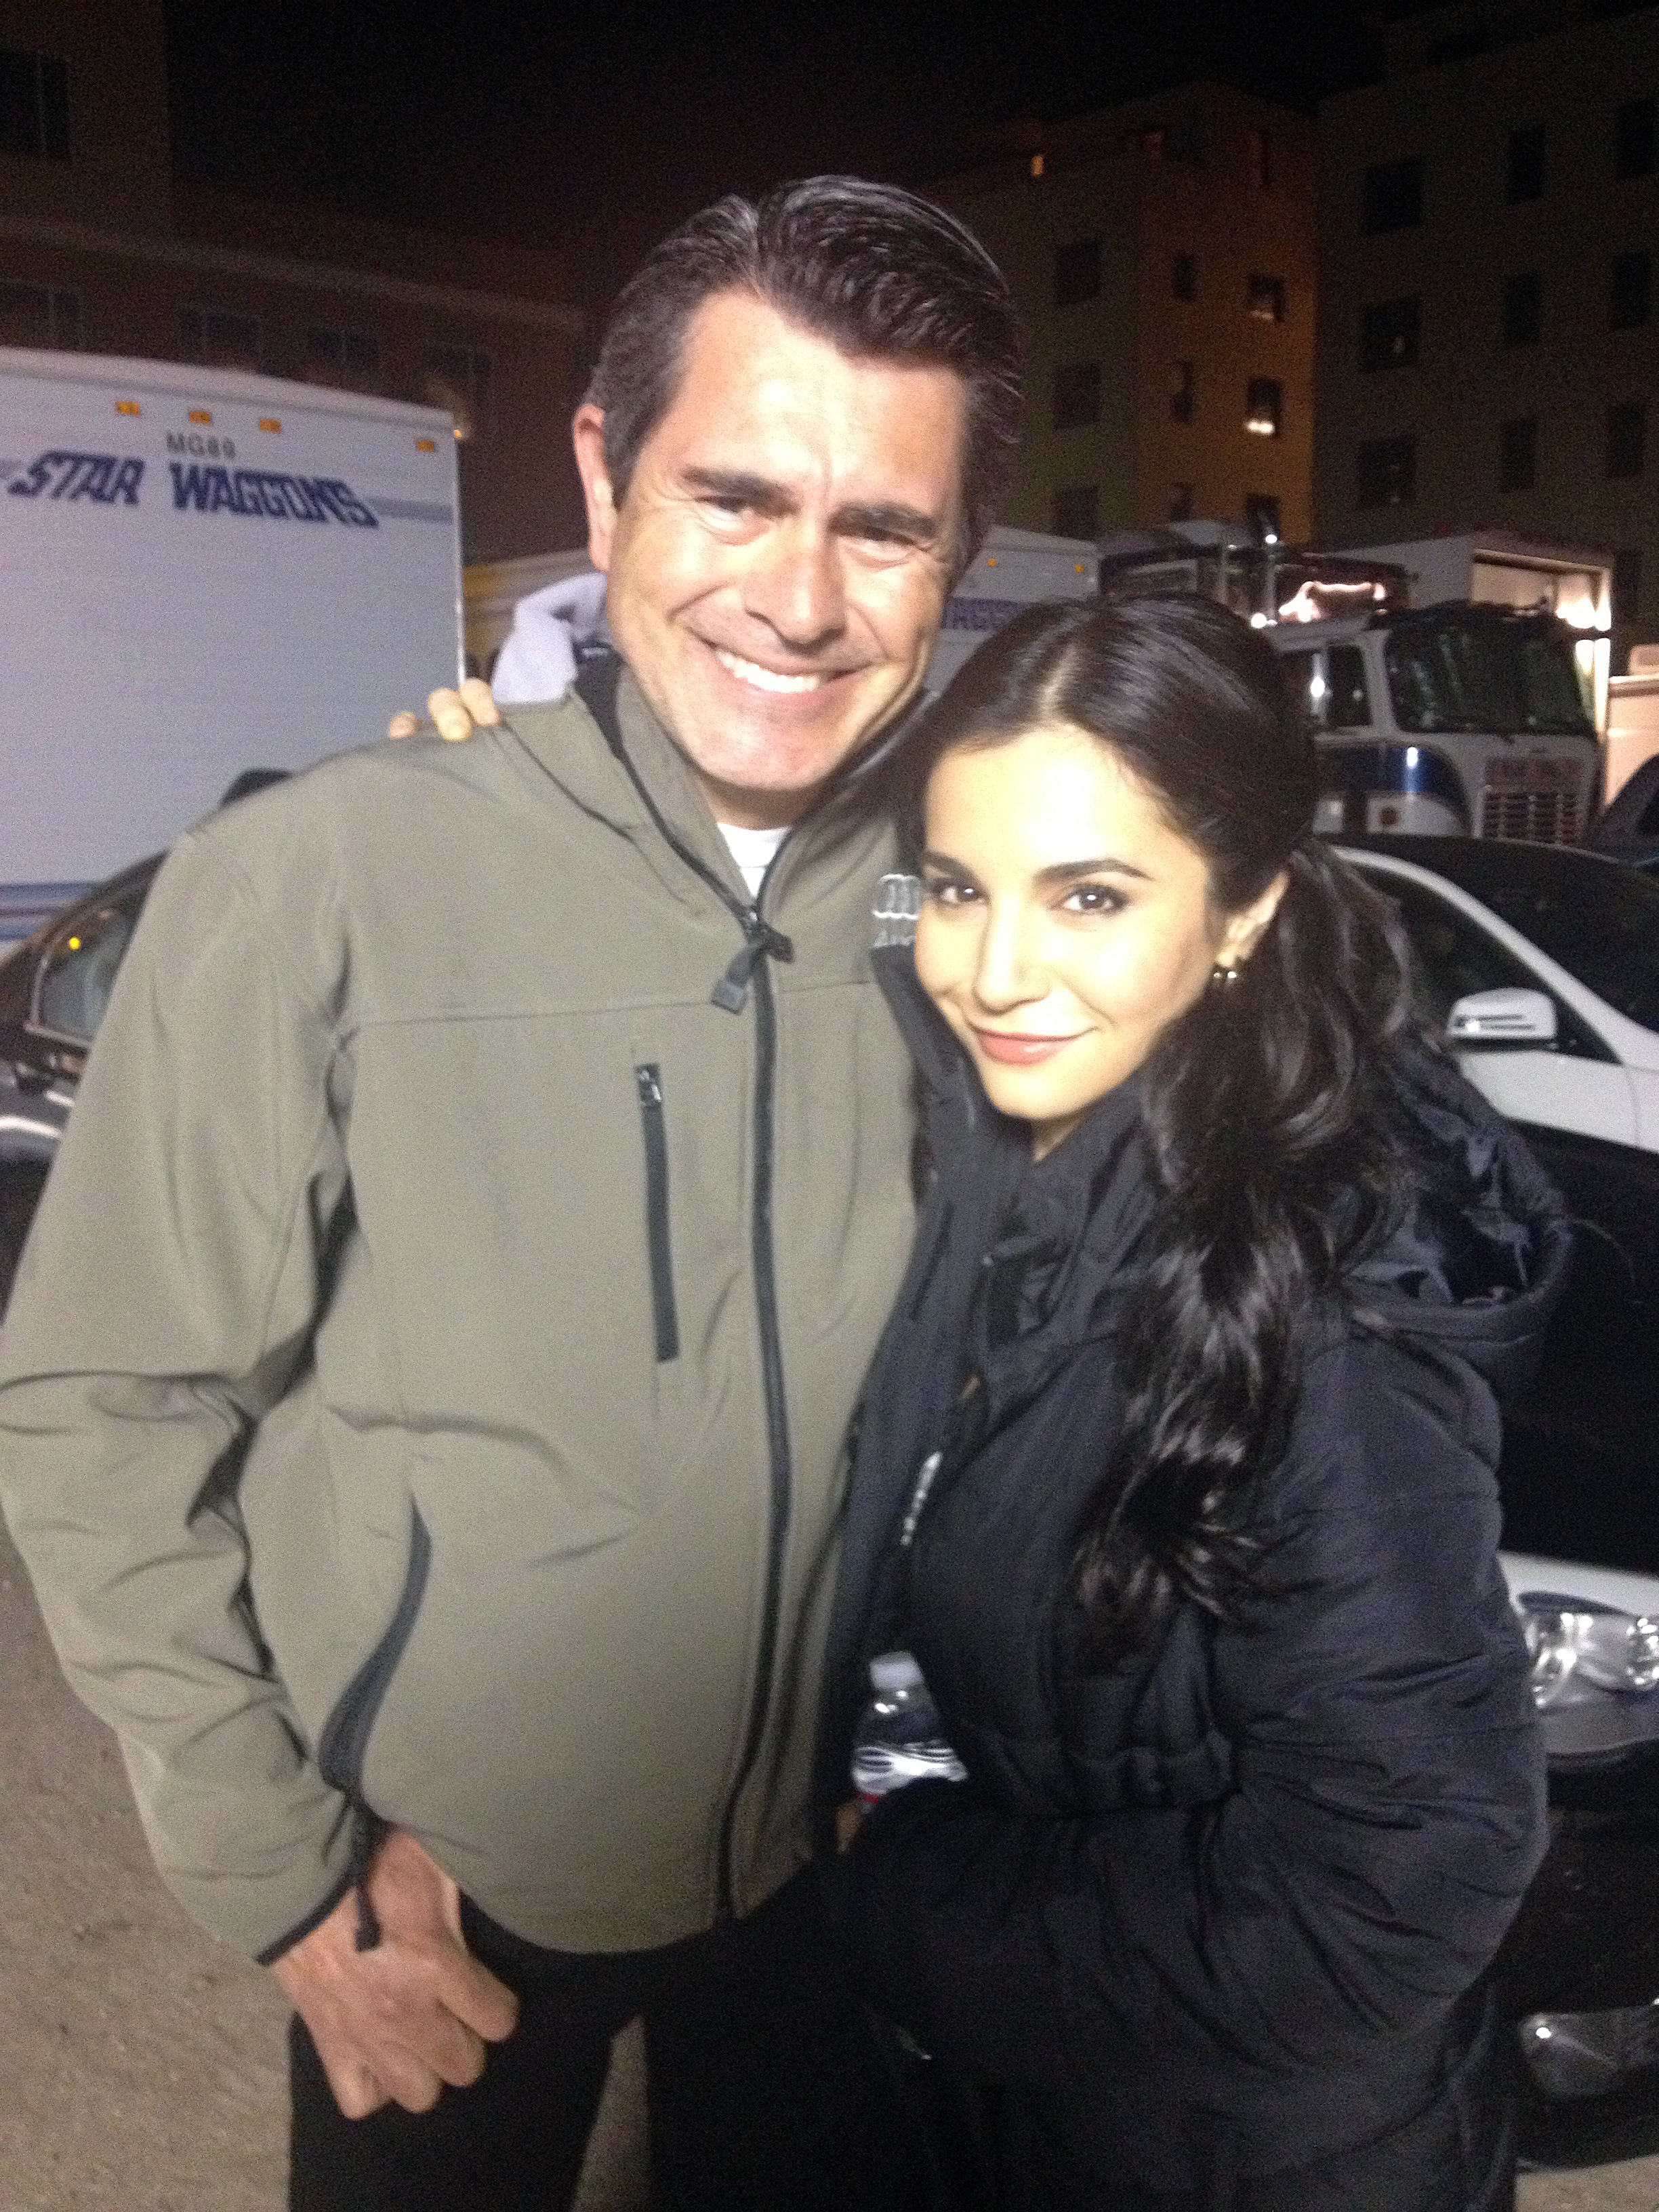 Francisco Javier Gomez With The Beautiful Mexican Actress Martha Higareda On Location, Pilot Season March 16, 2013